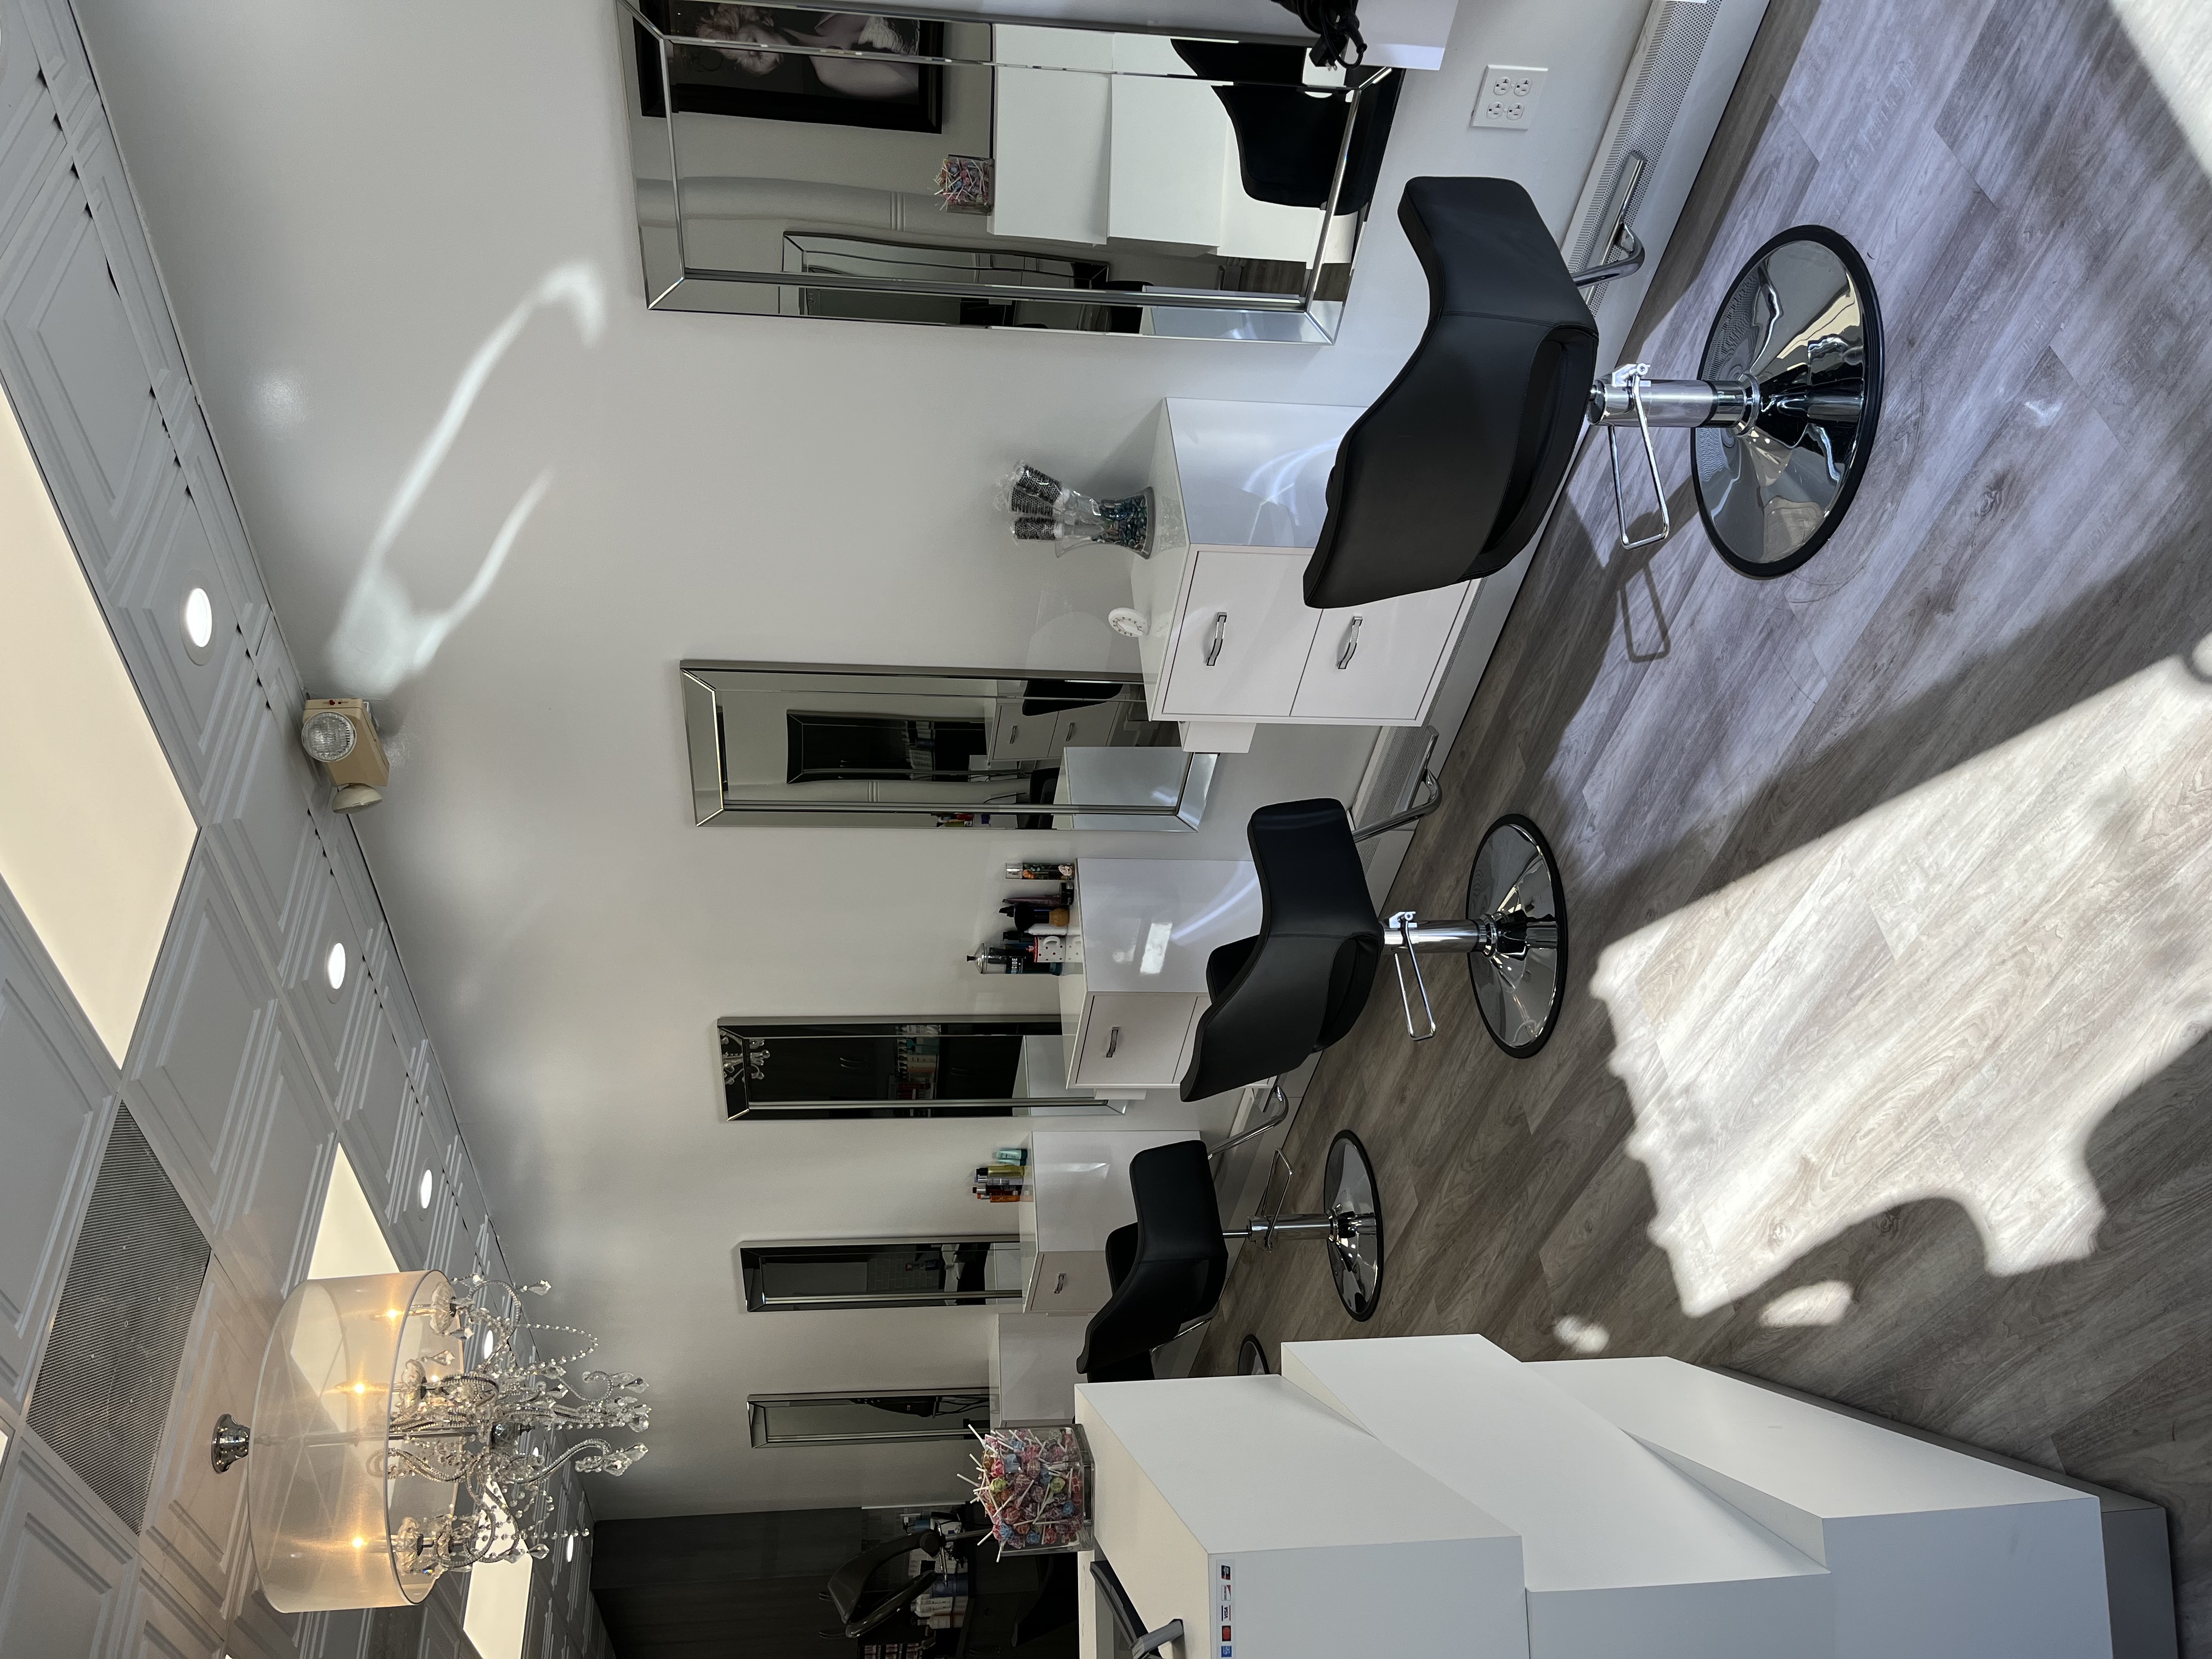 Hair Salon for Sale in Westchester County, NY